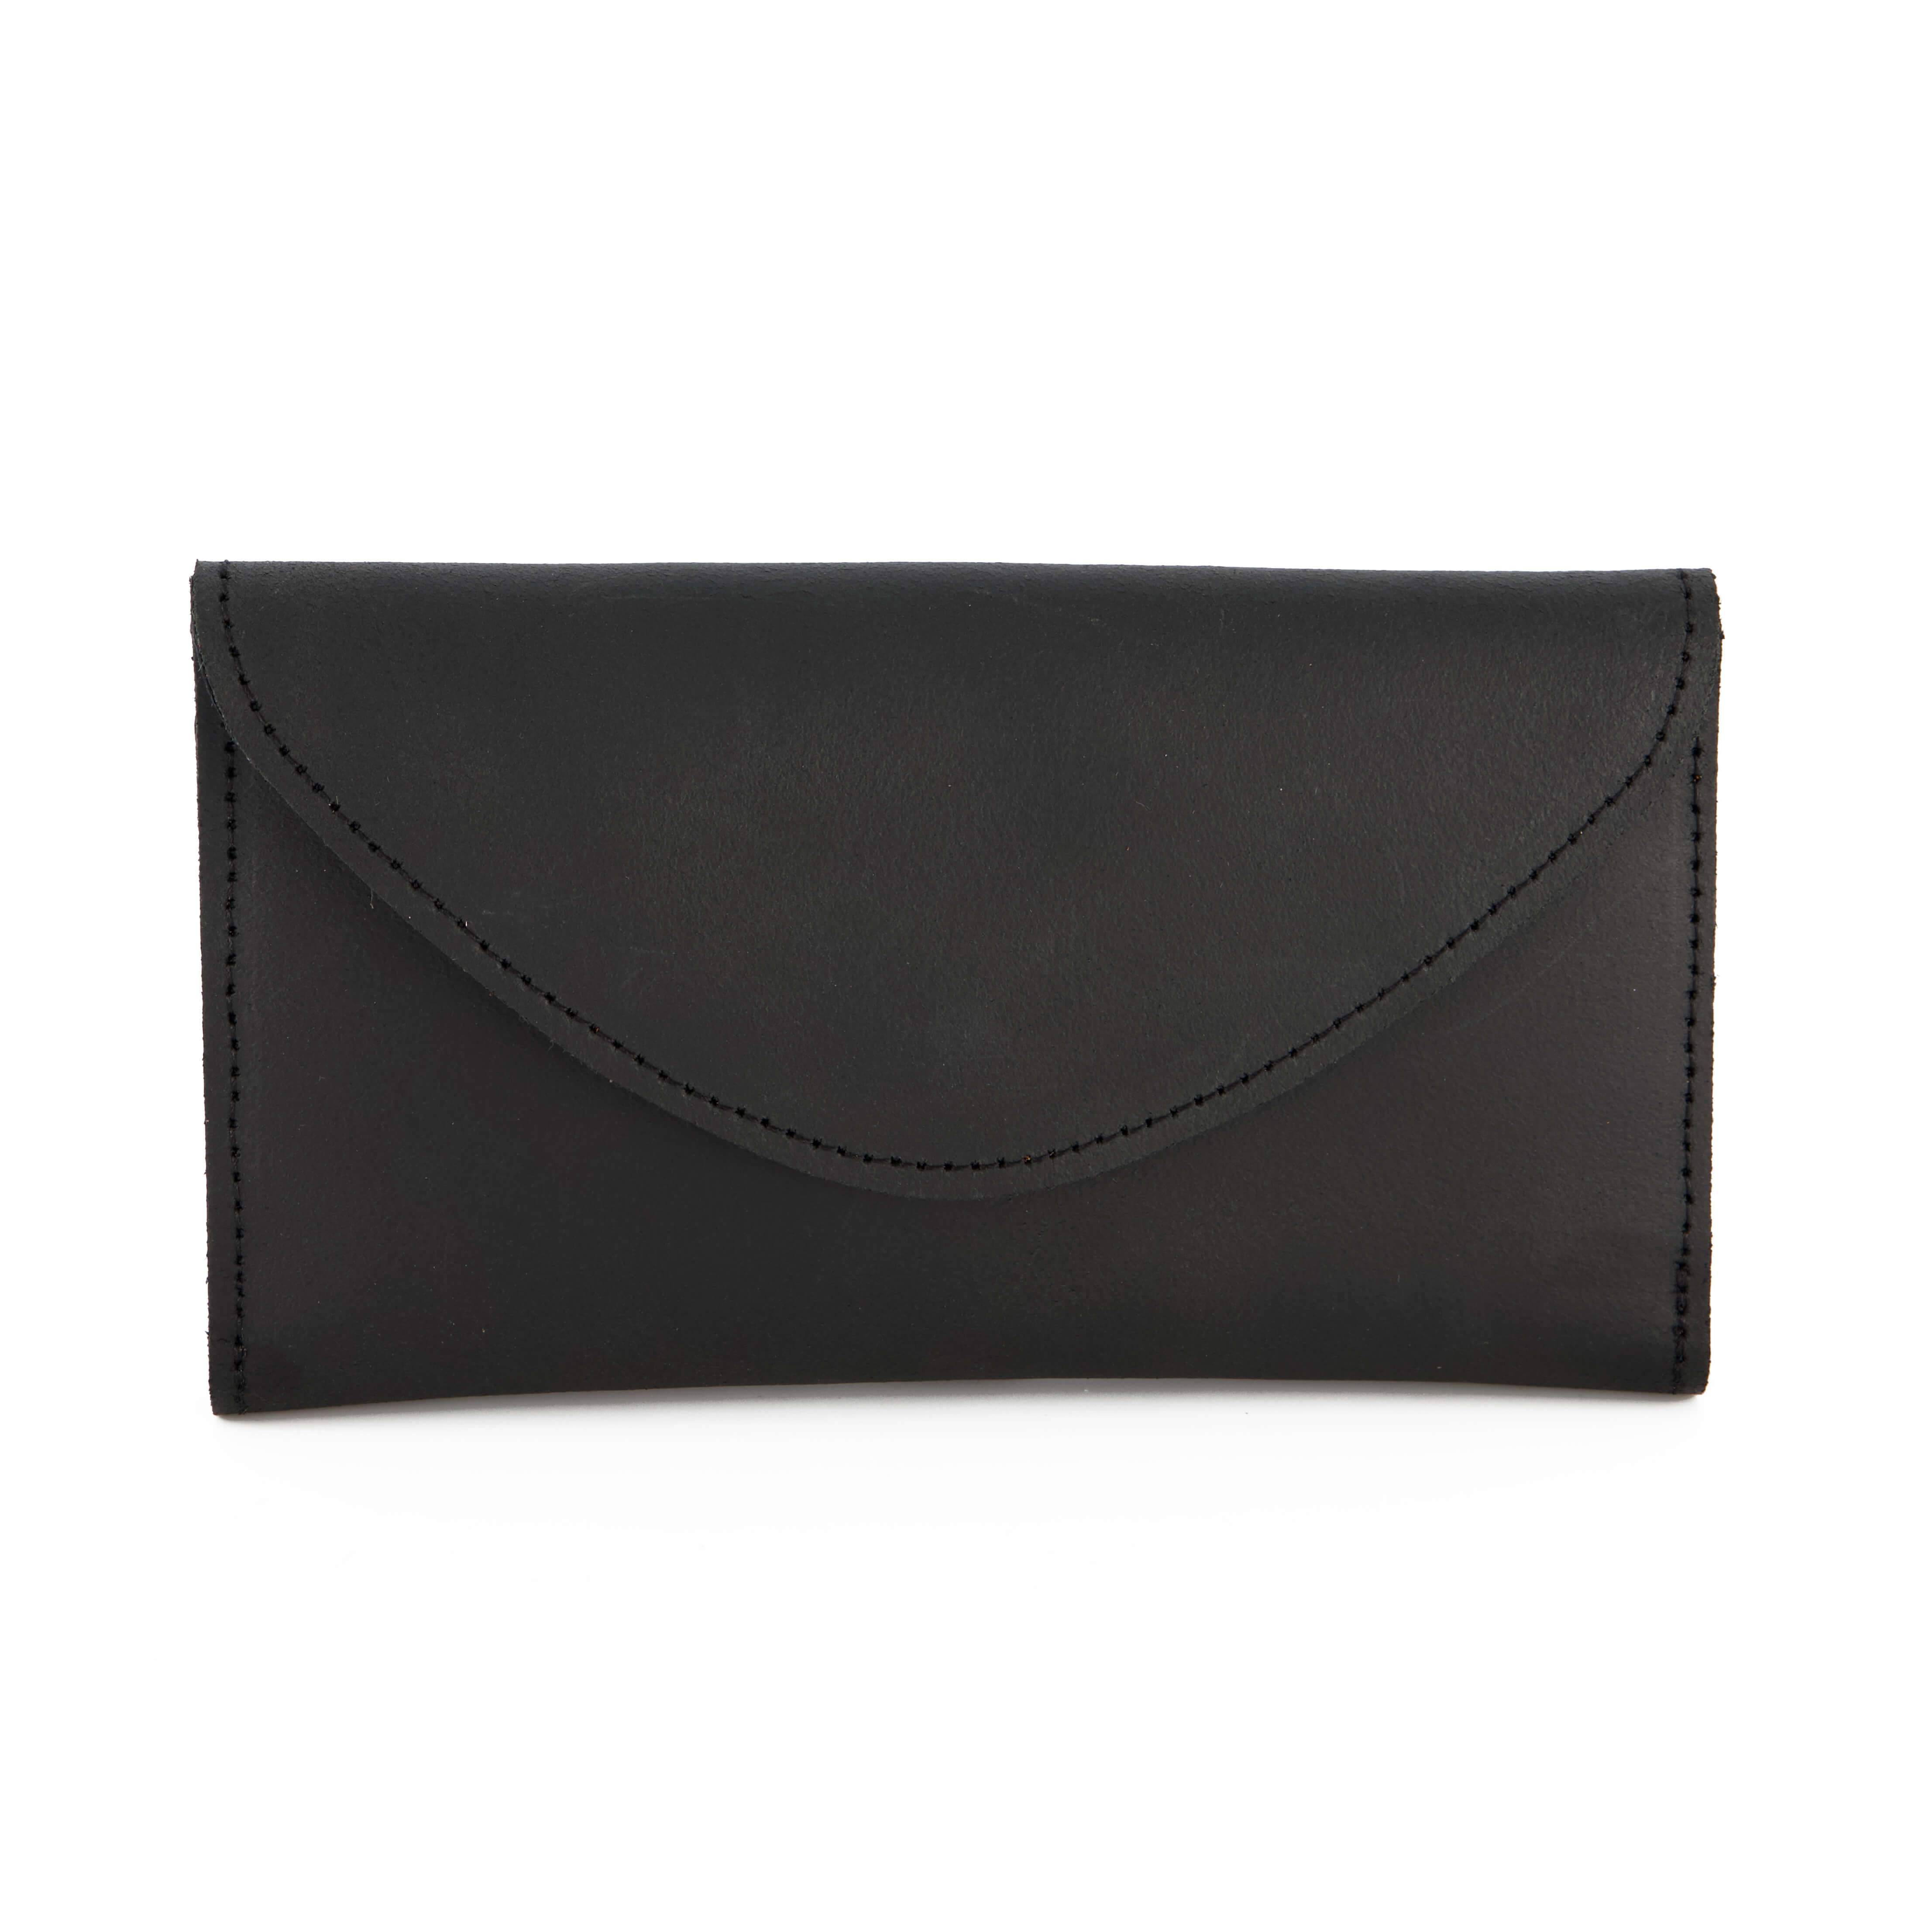 COACH: envelope clutch in textured leather - Black